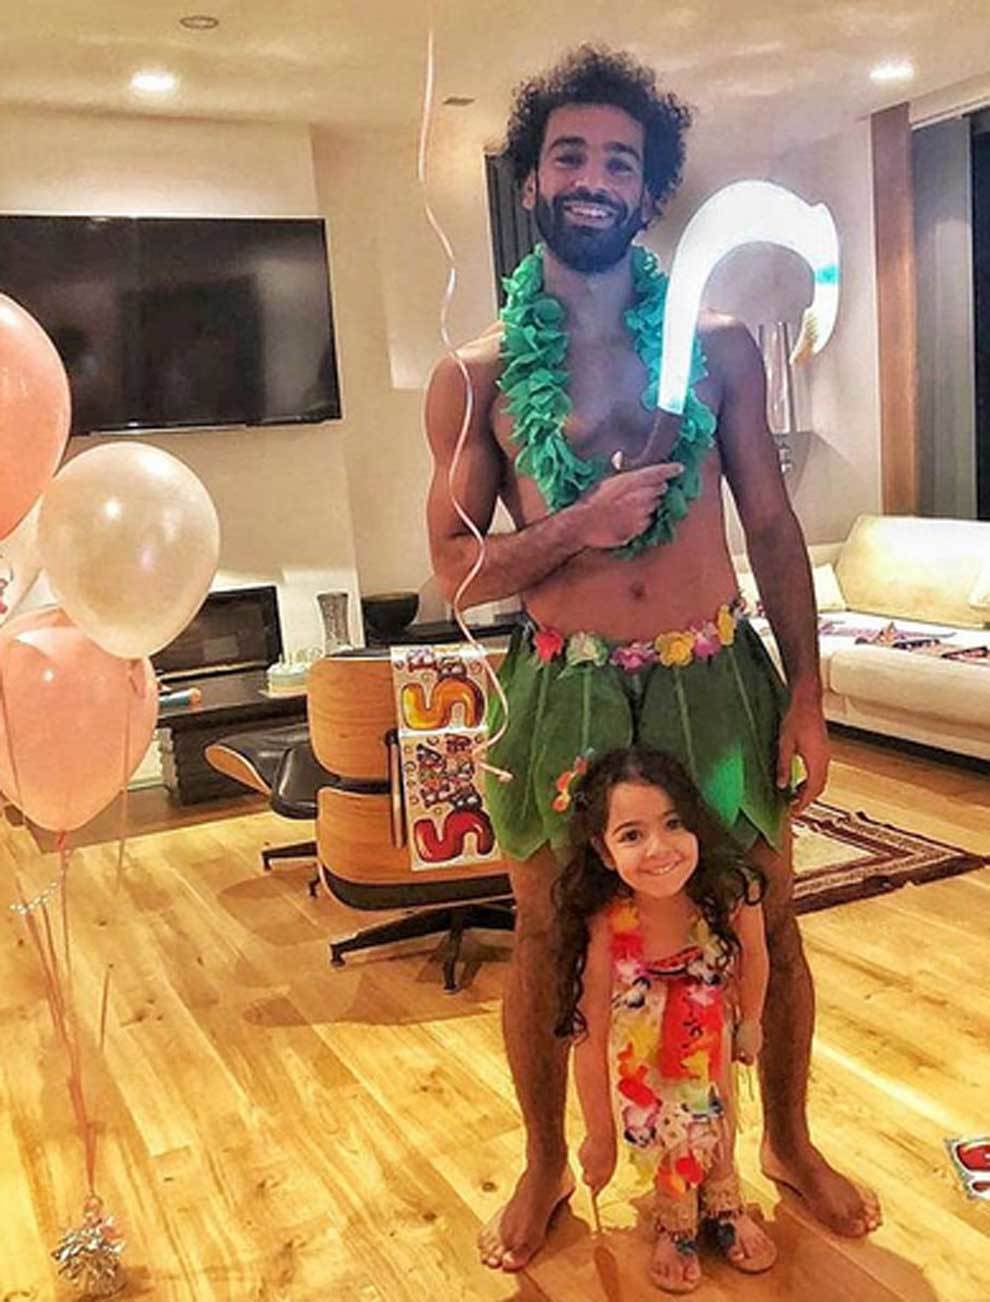 Mohamed Salah dressed as Maui from the movie Moana